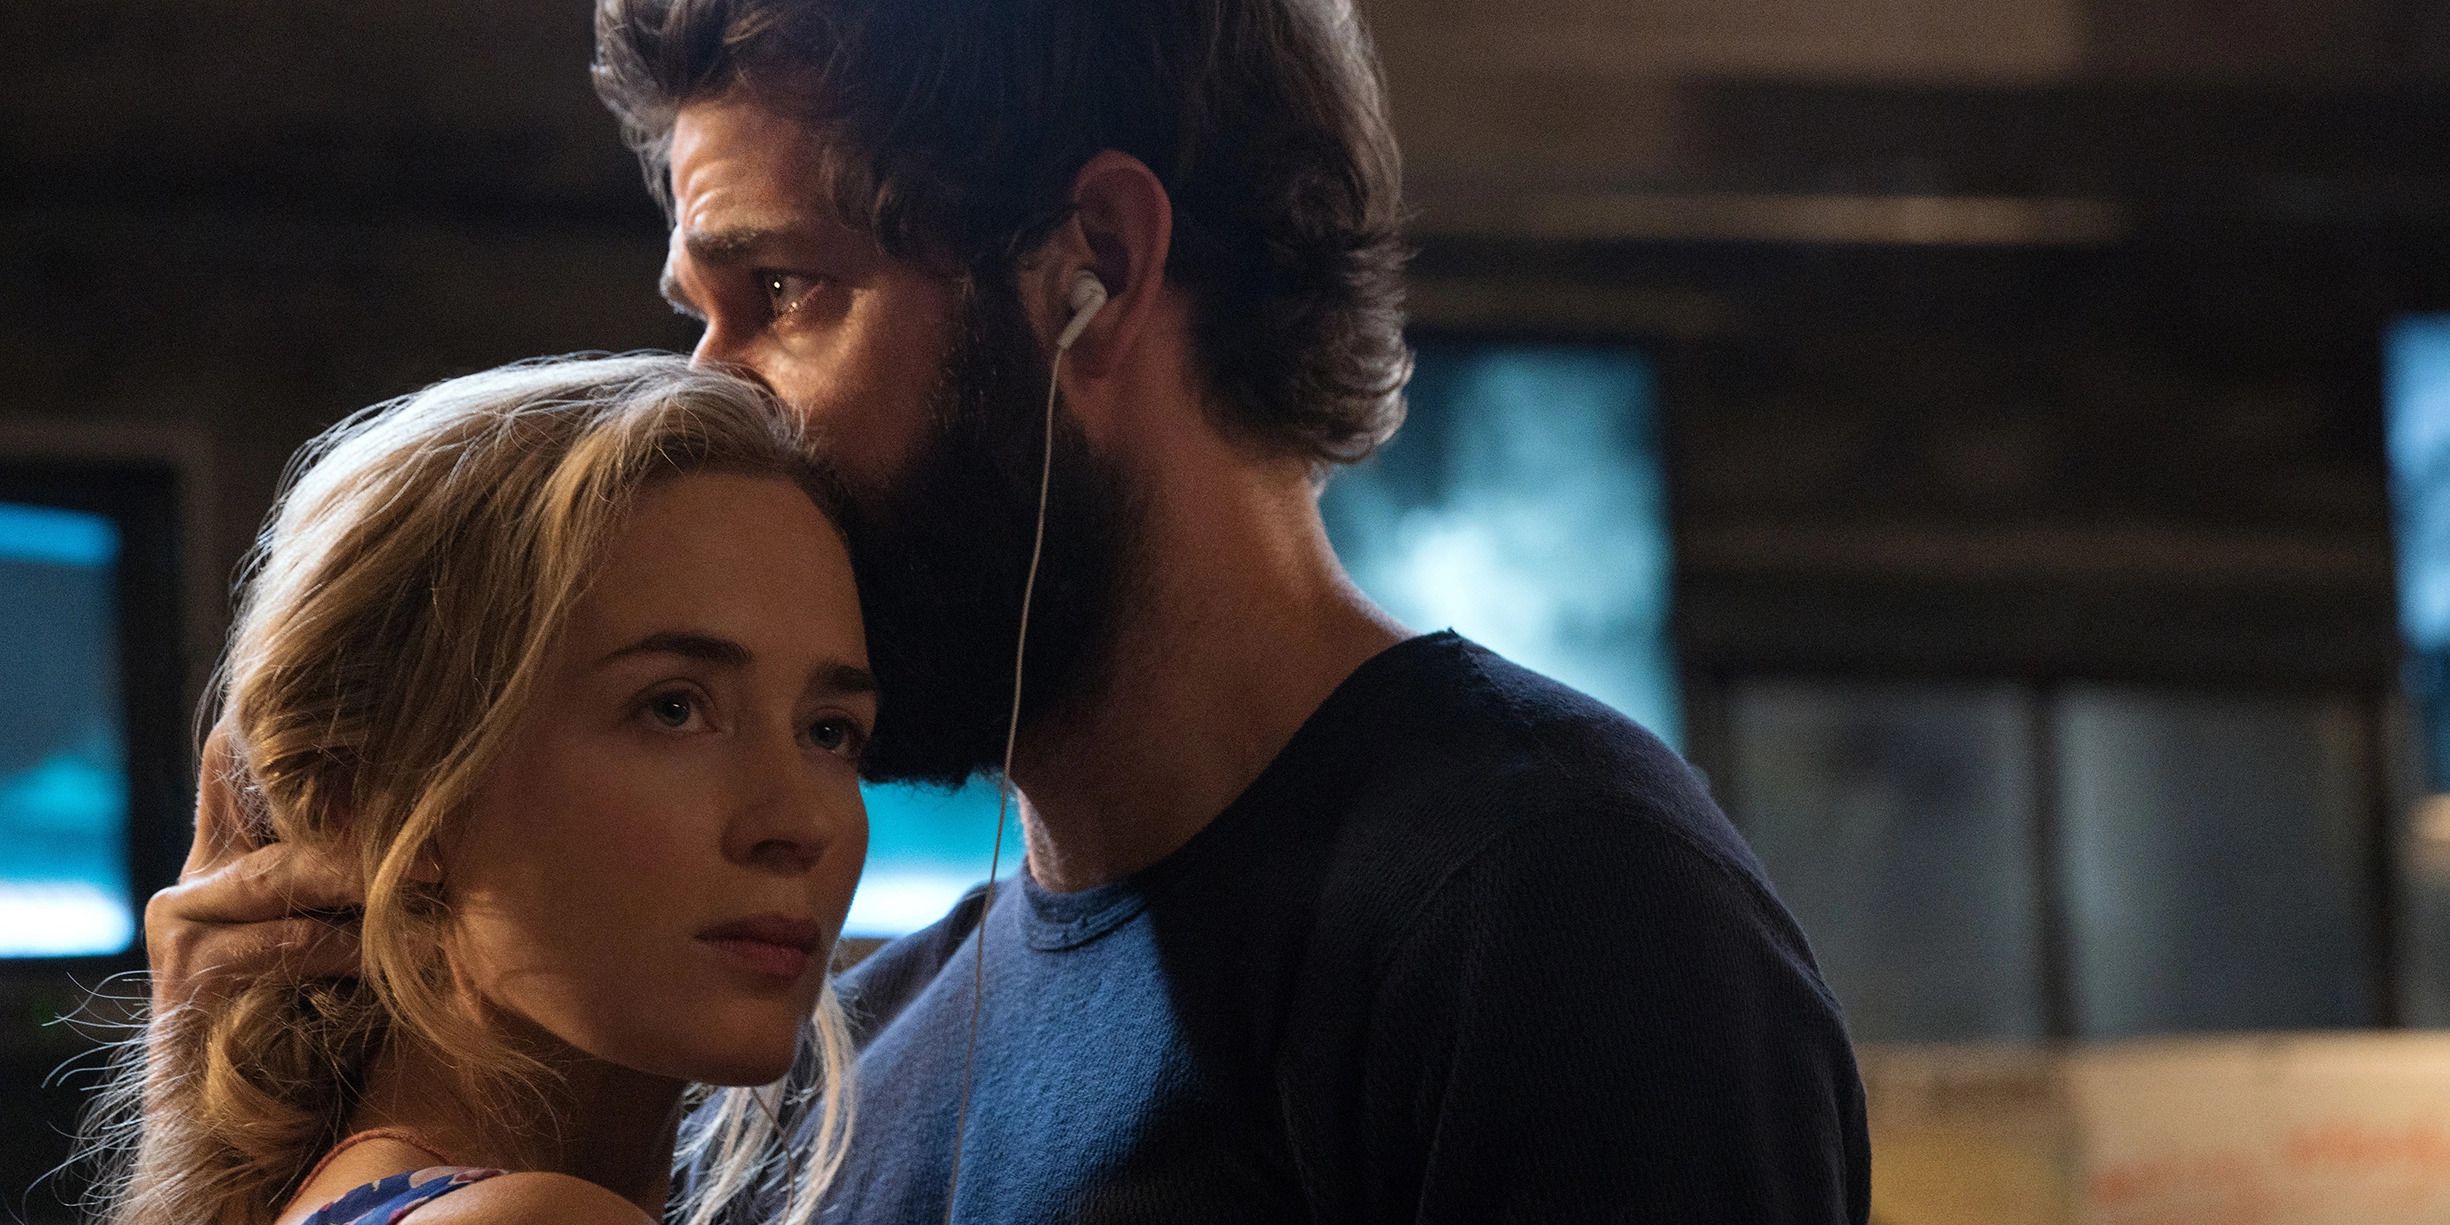 Lee and Evelyn embracing with music in the horror film, A Quiet Place